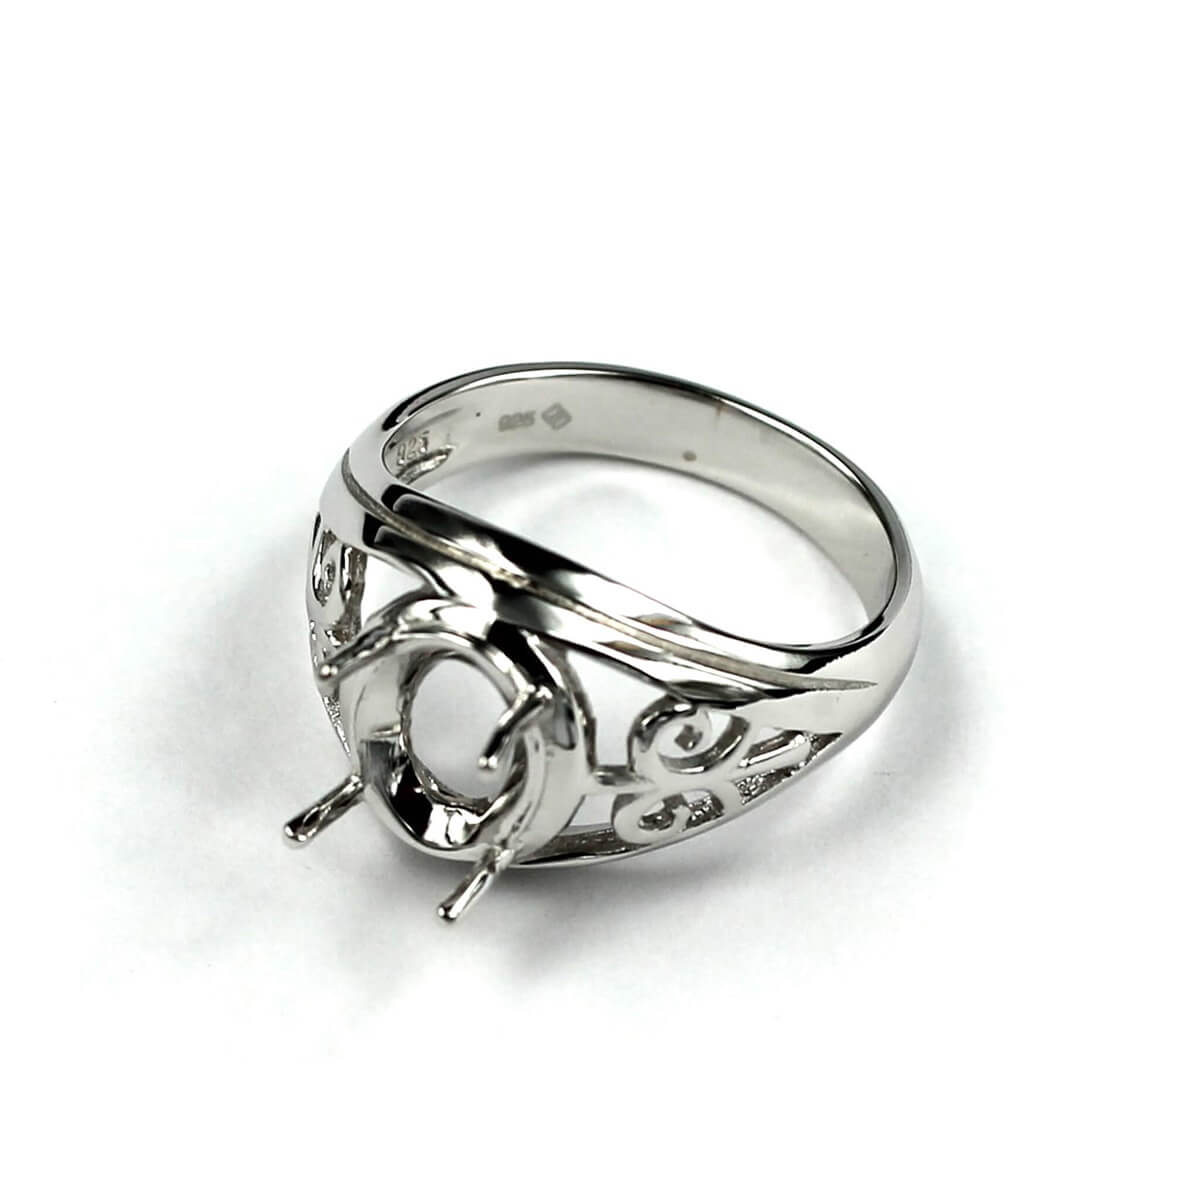 Unique Pattern Ring with Oval Prong Mounting in Sterling Silver for 8x10mm Stones 